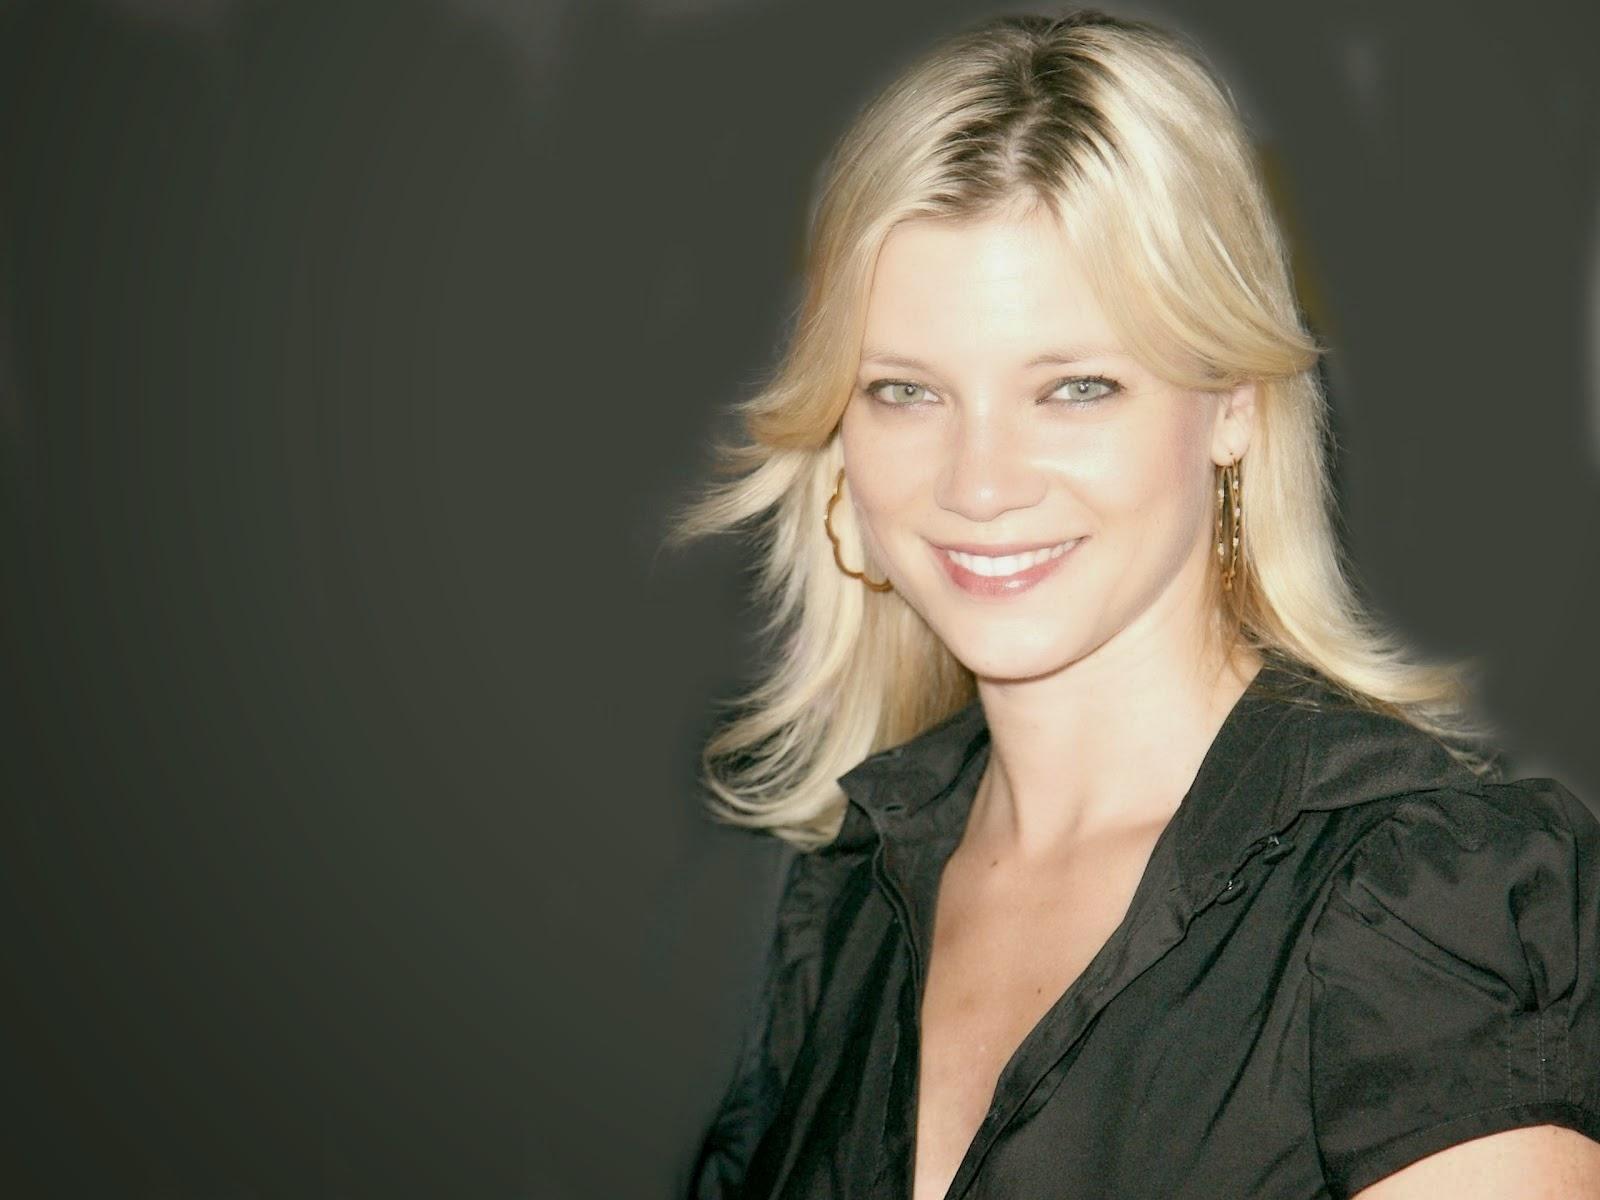 Group of Amy Smart 409287